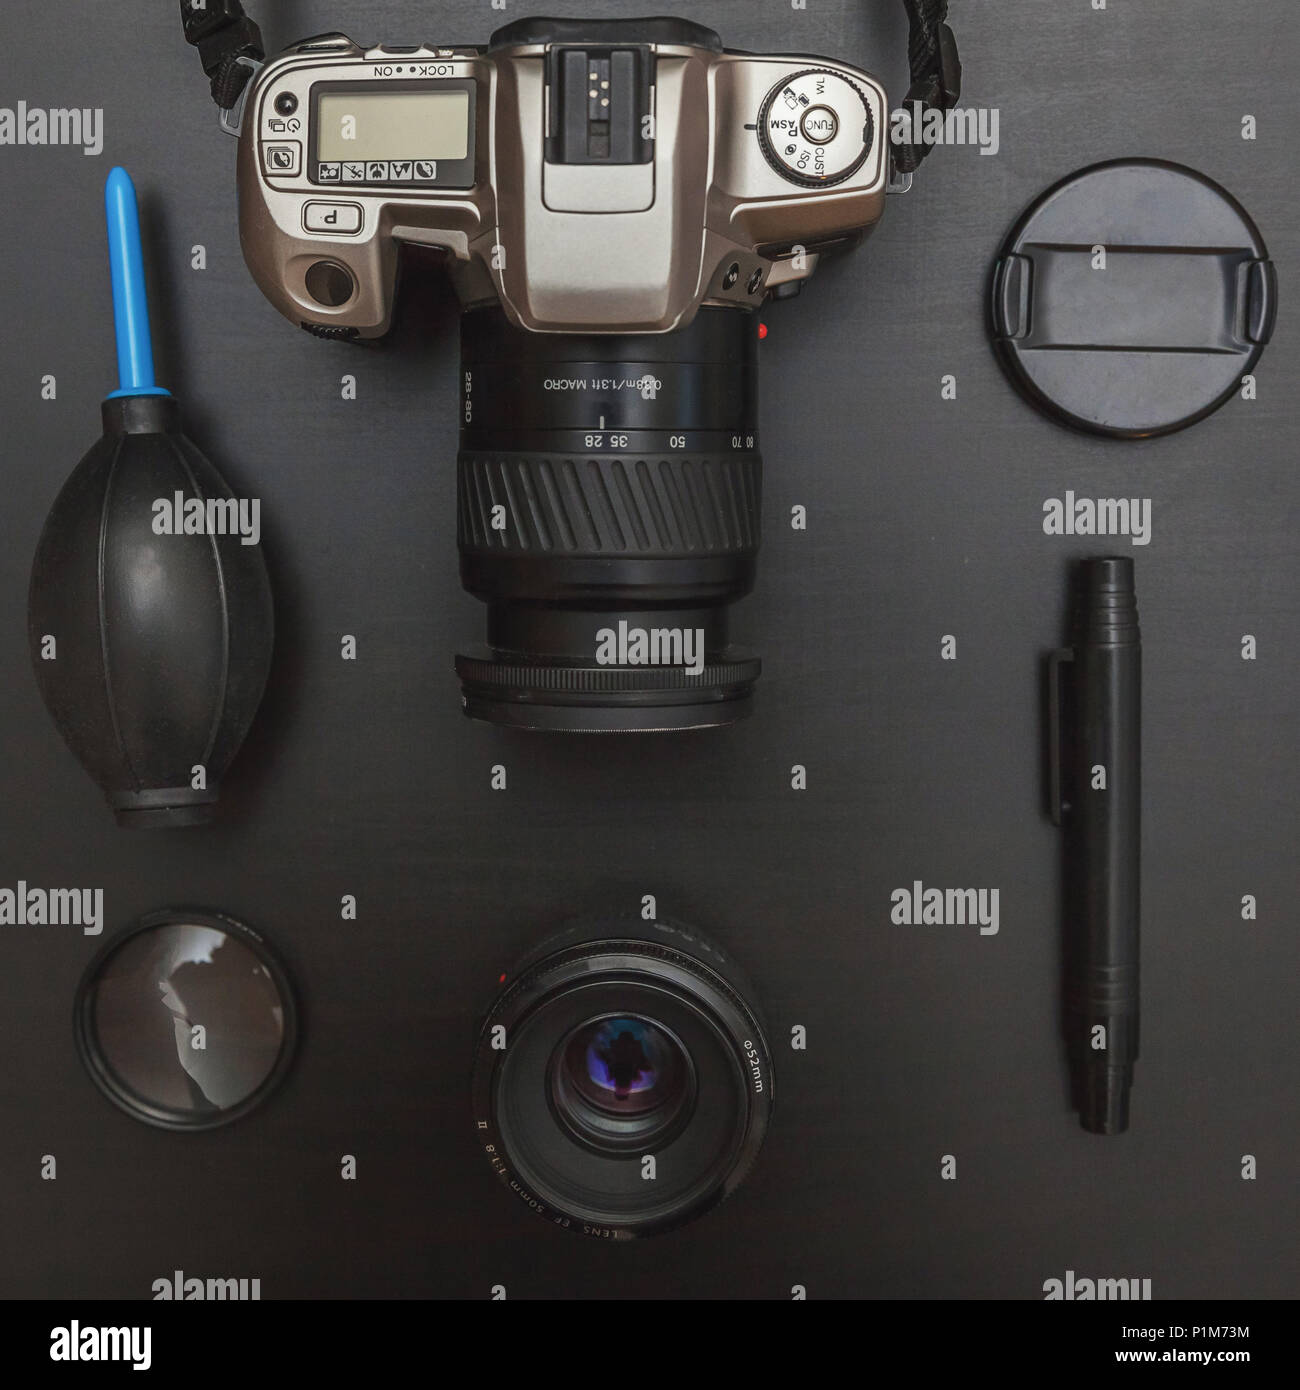 Top view of work space photographer with dslr camera system, camera  cleaning kit, lens and camera accessory on black table background. Hobby  journalis Stock Photo - Alamy